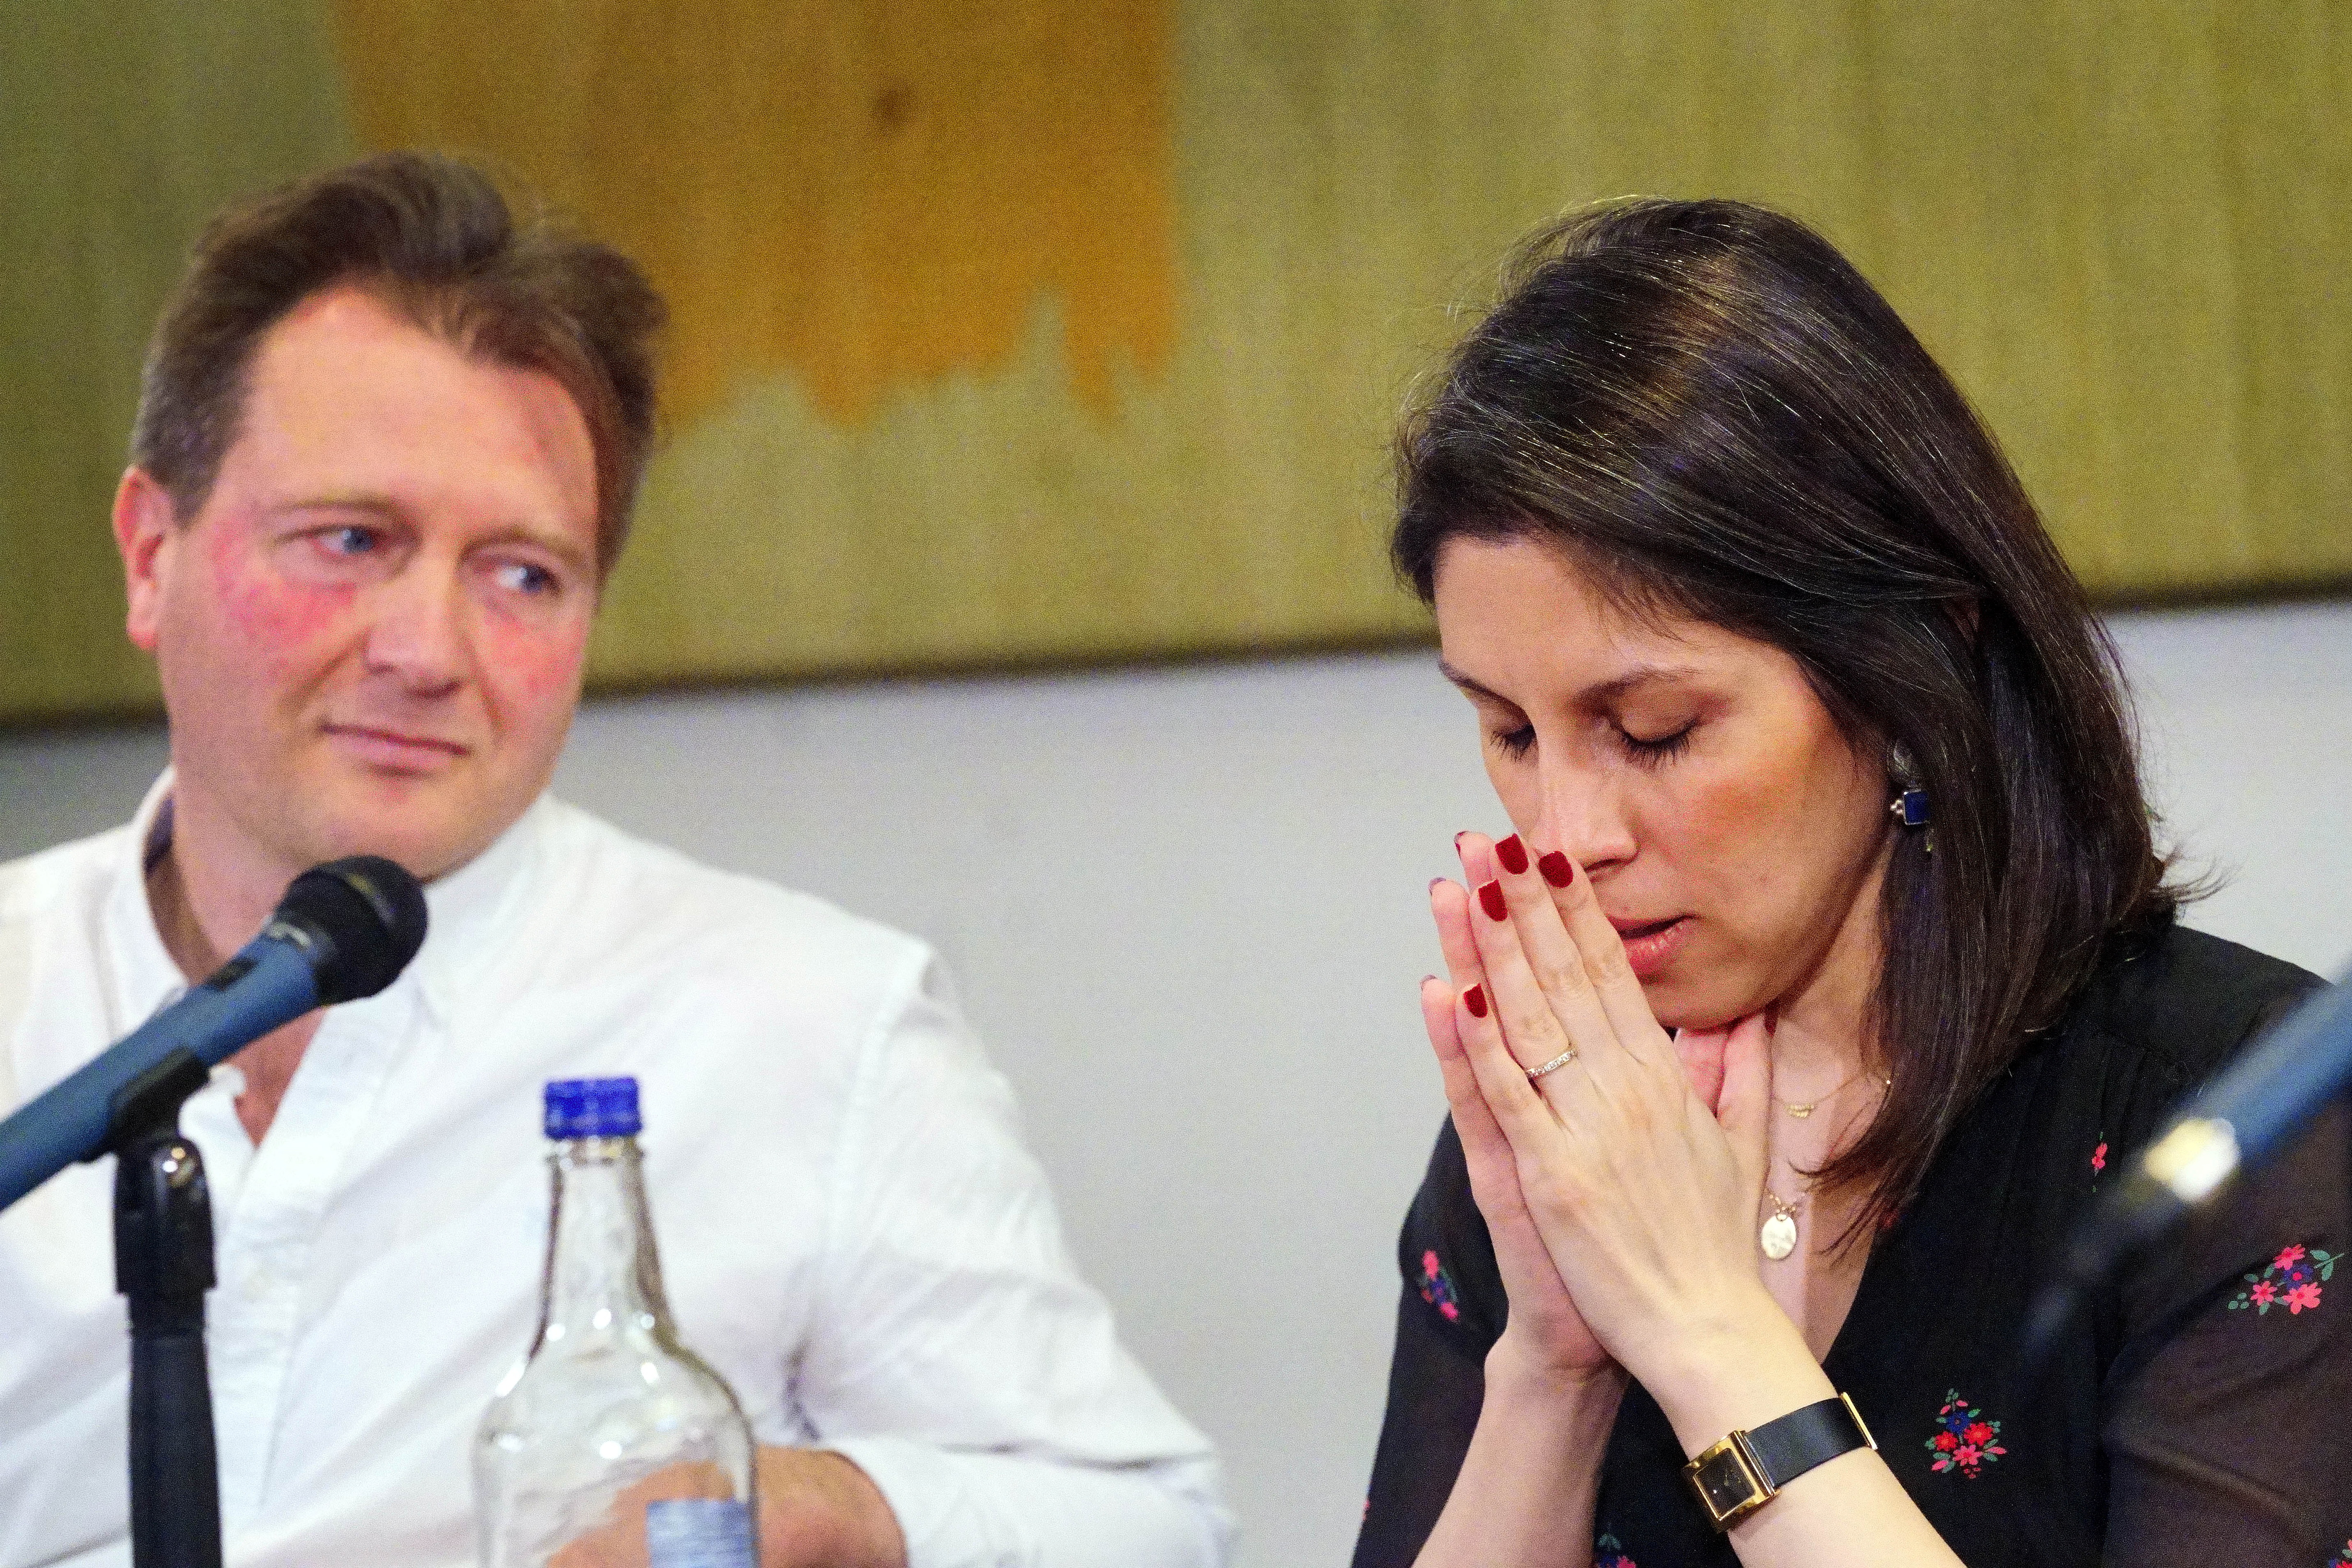 Zaghari-Ratcliffe reacts during news conference in London